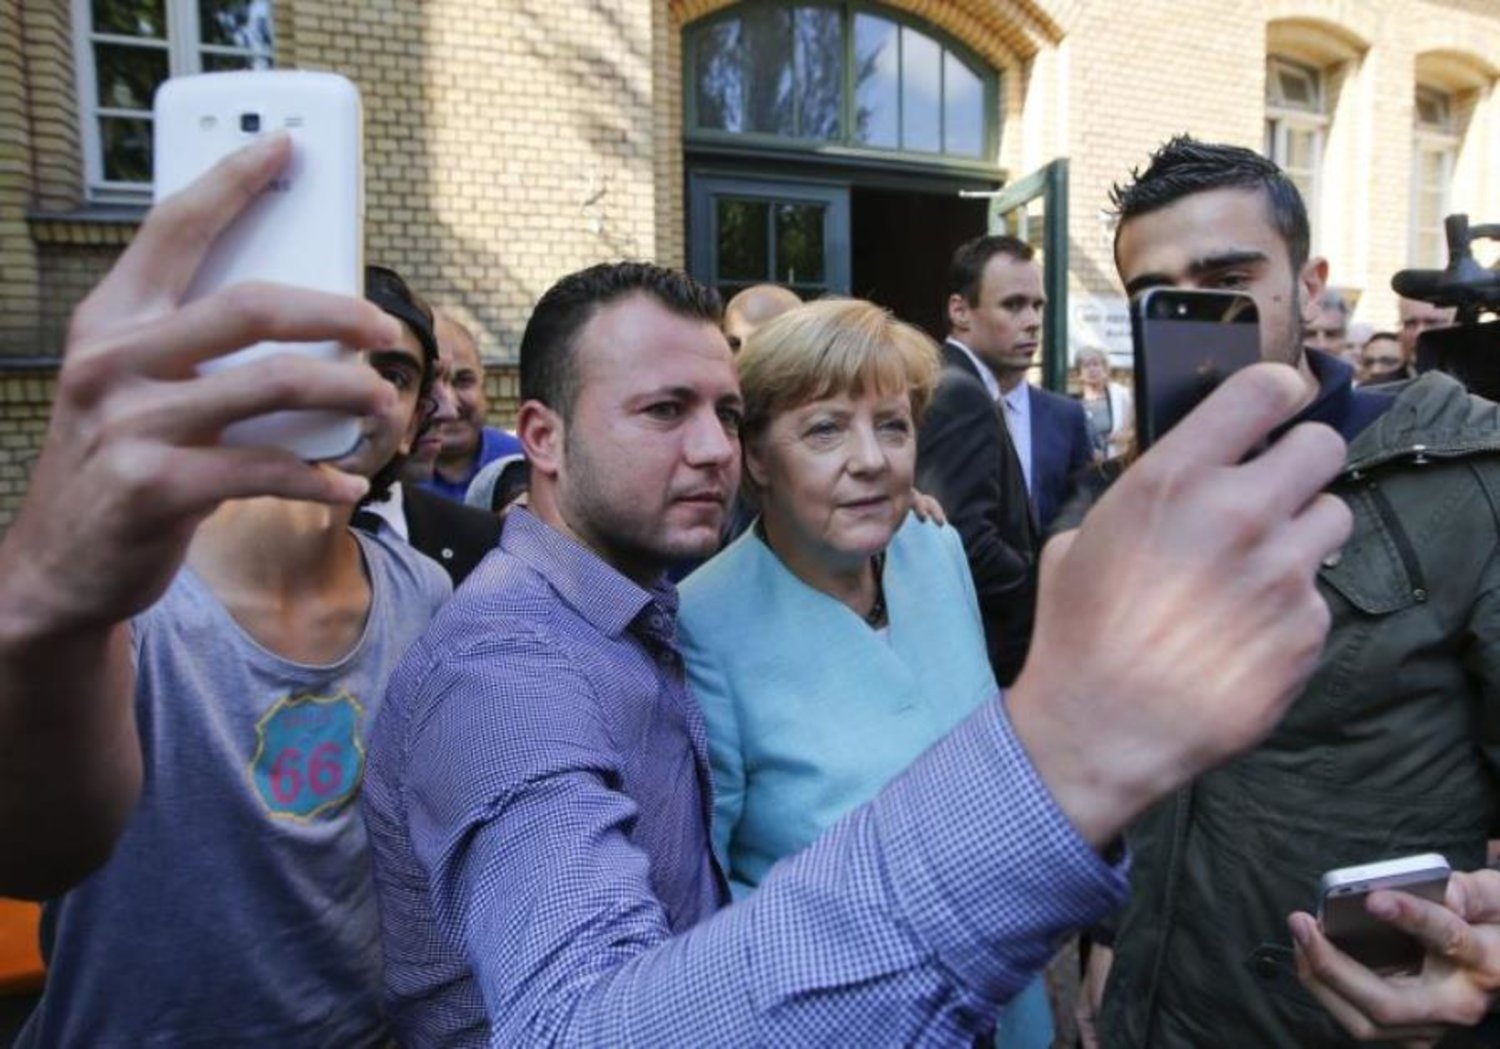 Migrants from Syria and Iraq take selfies with German Chancellor Angela Merkel outside a refugee camp near the Federal Office for Migration and Refugees after their registration at Berlin's Spandau district, Germany, September 10, 2015. Reuters